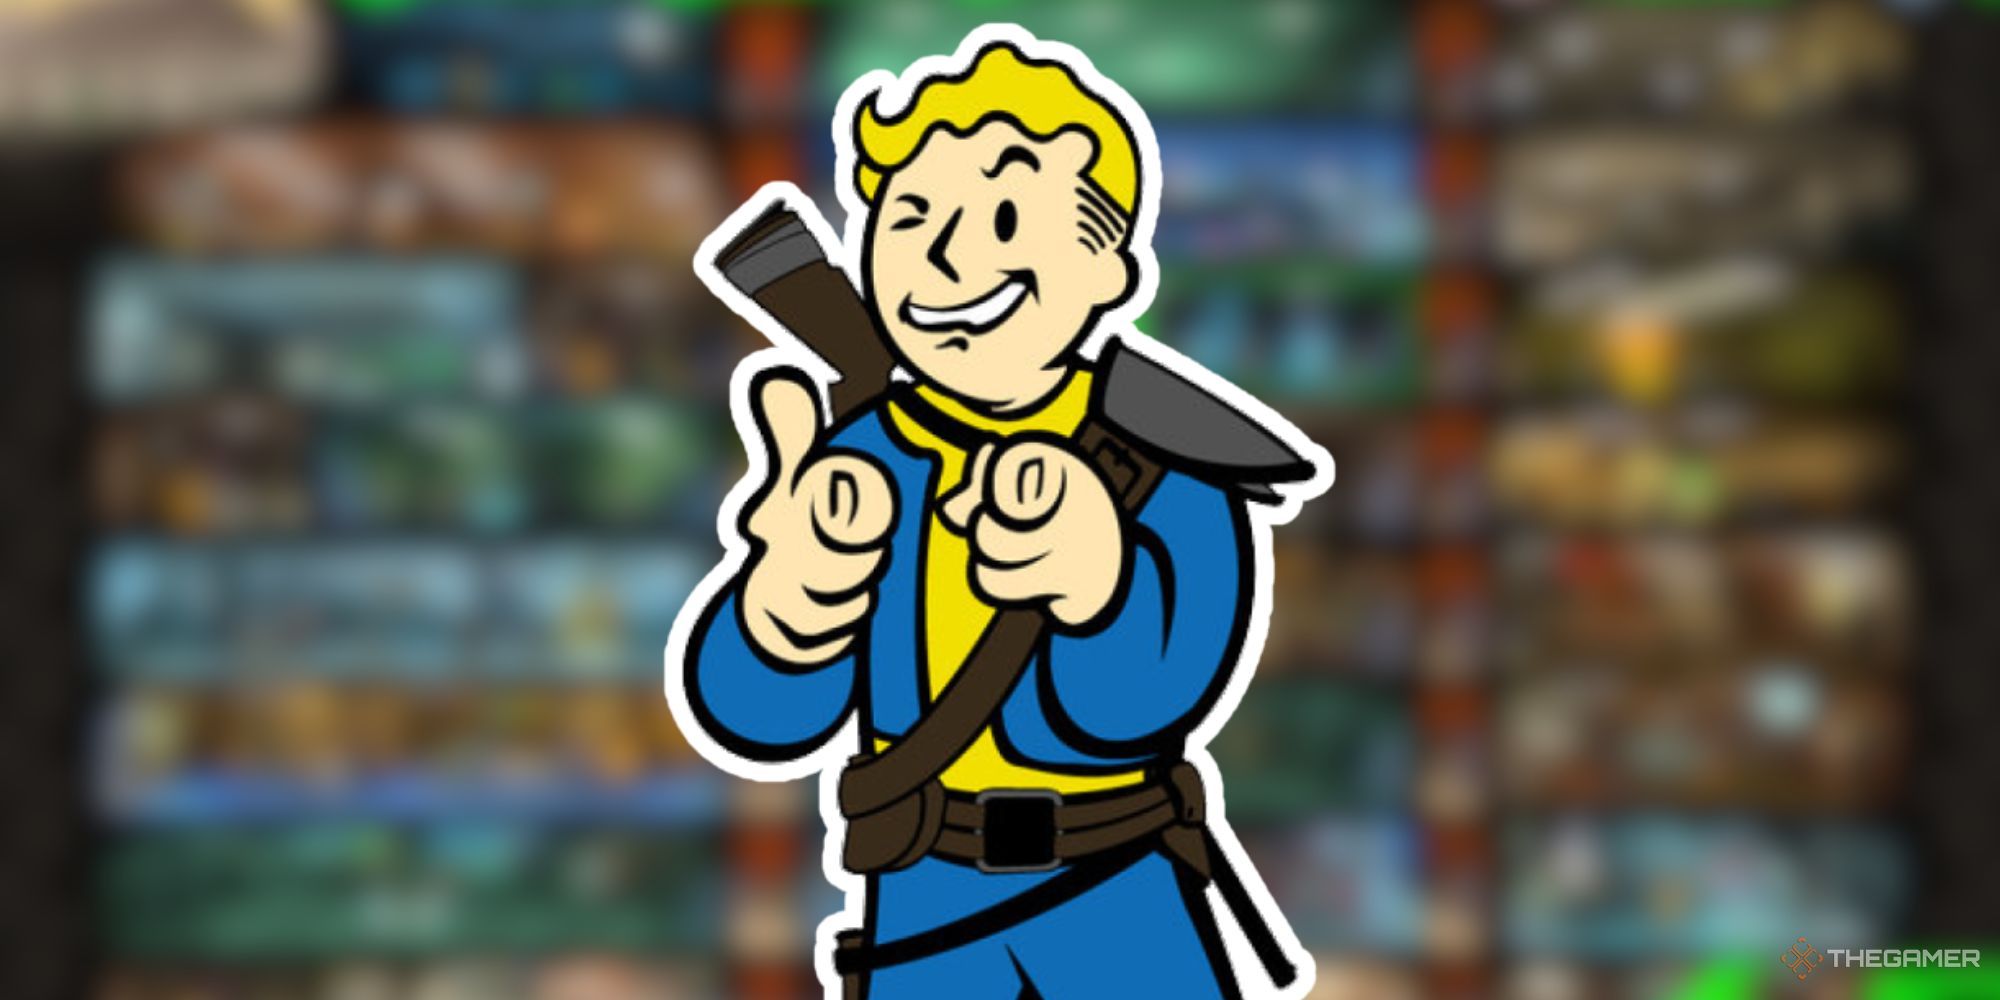 Fallout Shelter Vault Boy Pointing Finger Guns At You And Winking Over Blurred Background